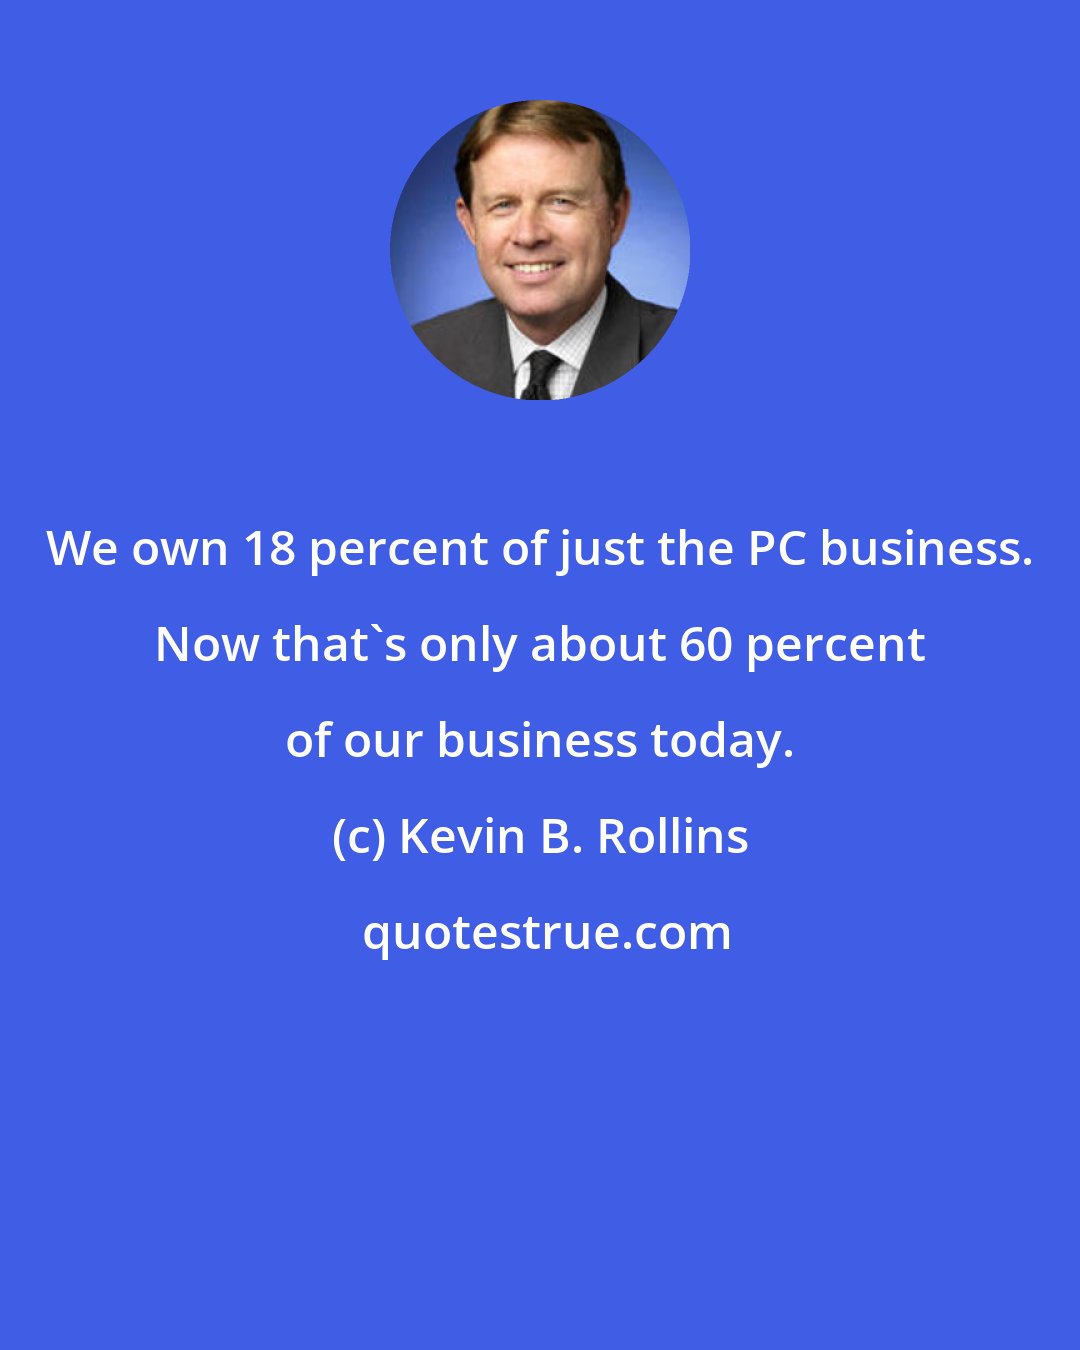 Kevin B. Rollins: We own 18 percent of just the PC business. Now that's only about 60 percent of our business today.